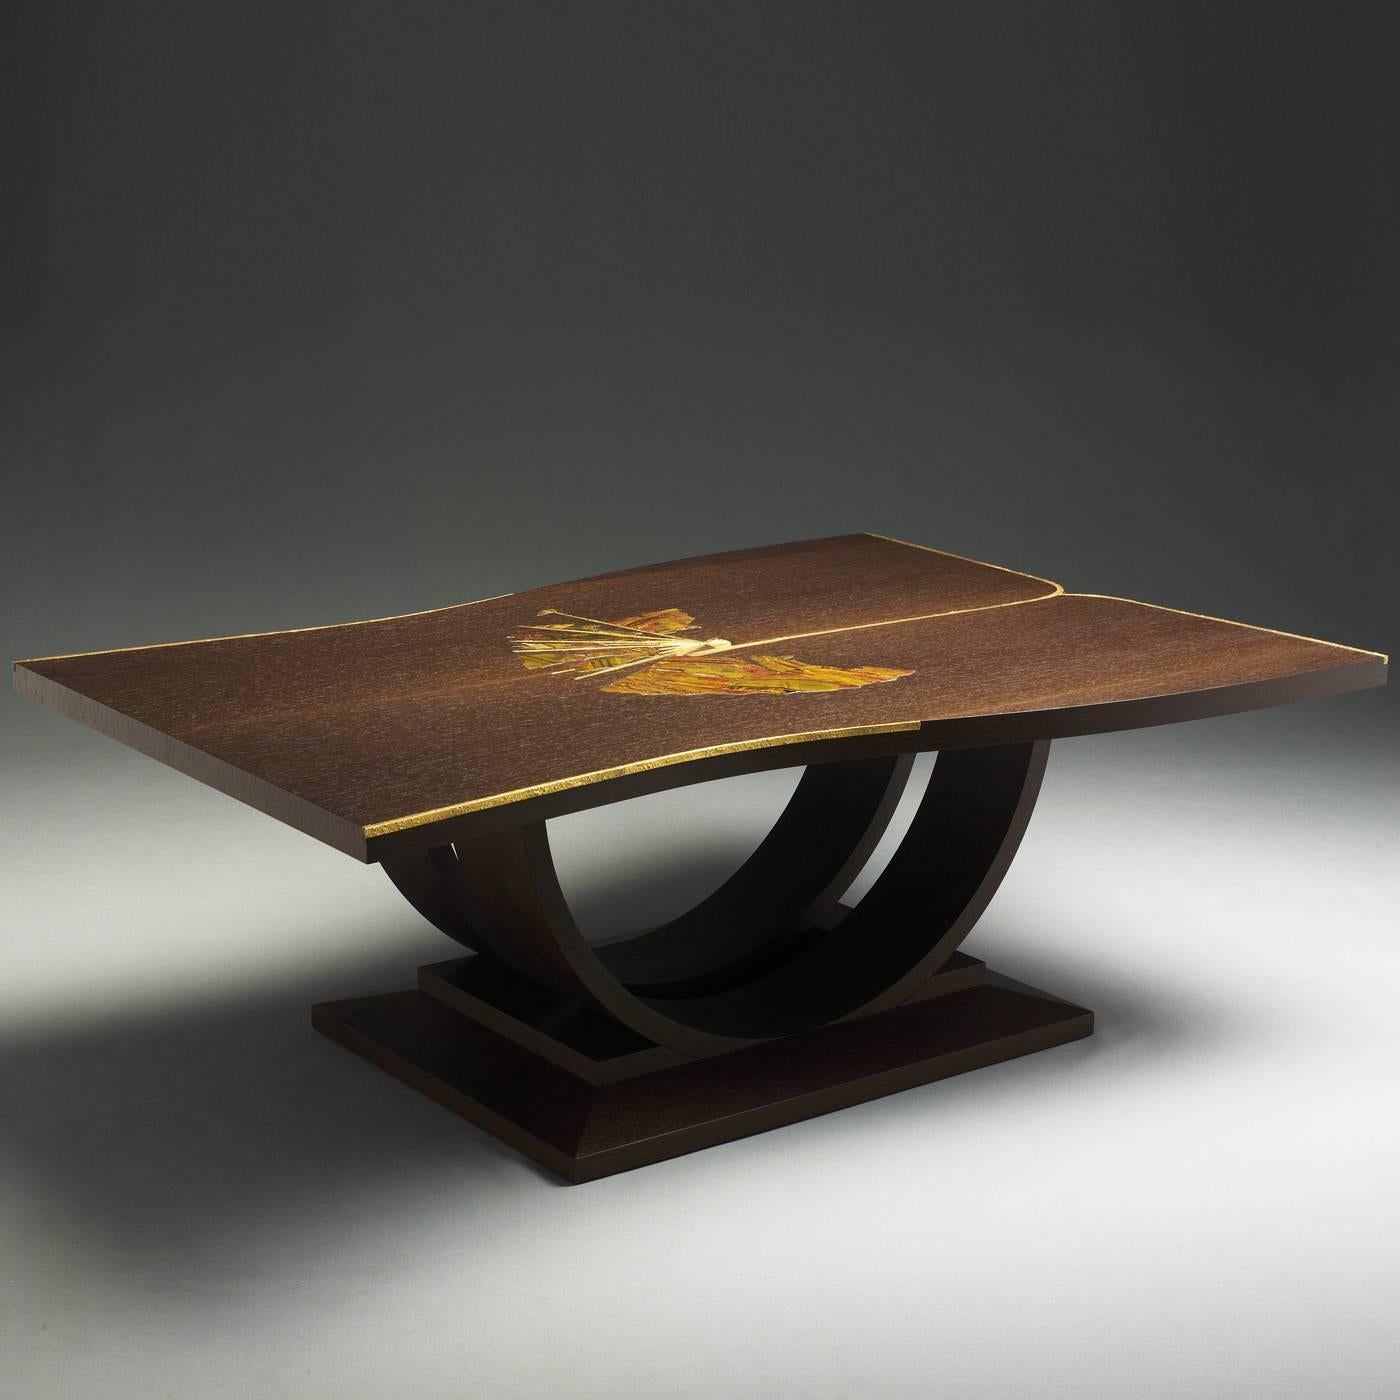 This elegant table is inspired by an ancient kimono and made in wenge wood with the top decorated with a fan in stone. The sticks highlighting the fan and edges of the table are in brass with an orange peel finish. Design Teresa Luni.